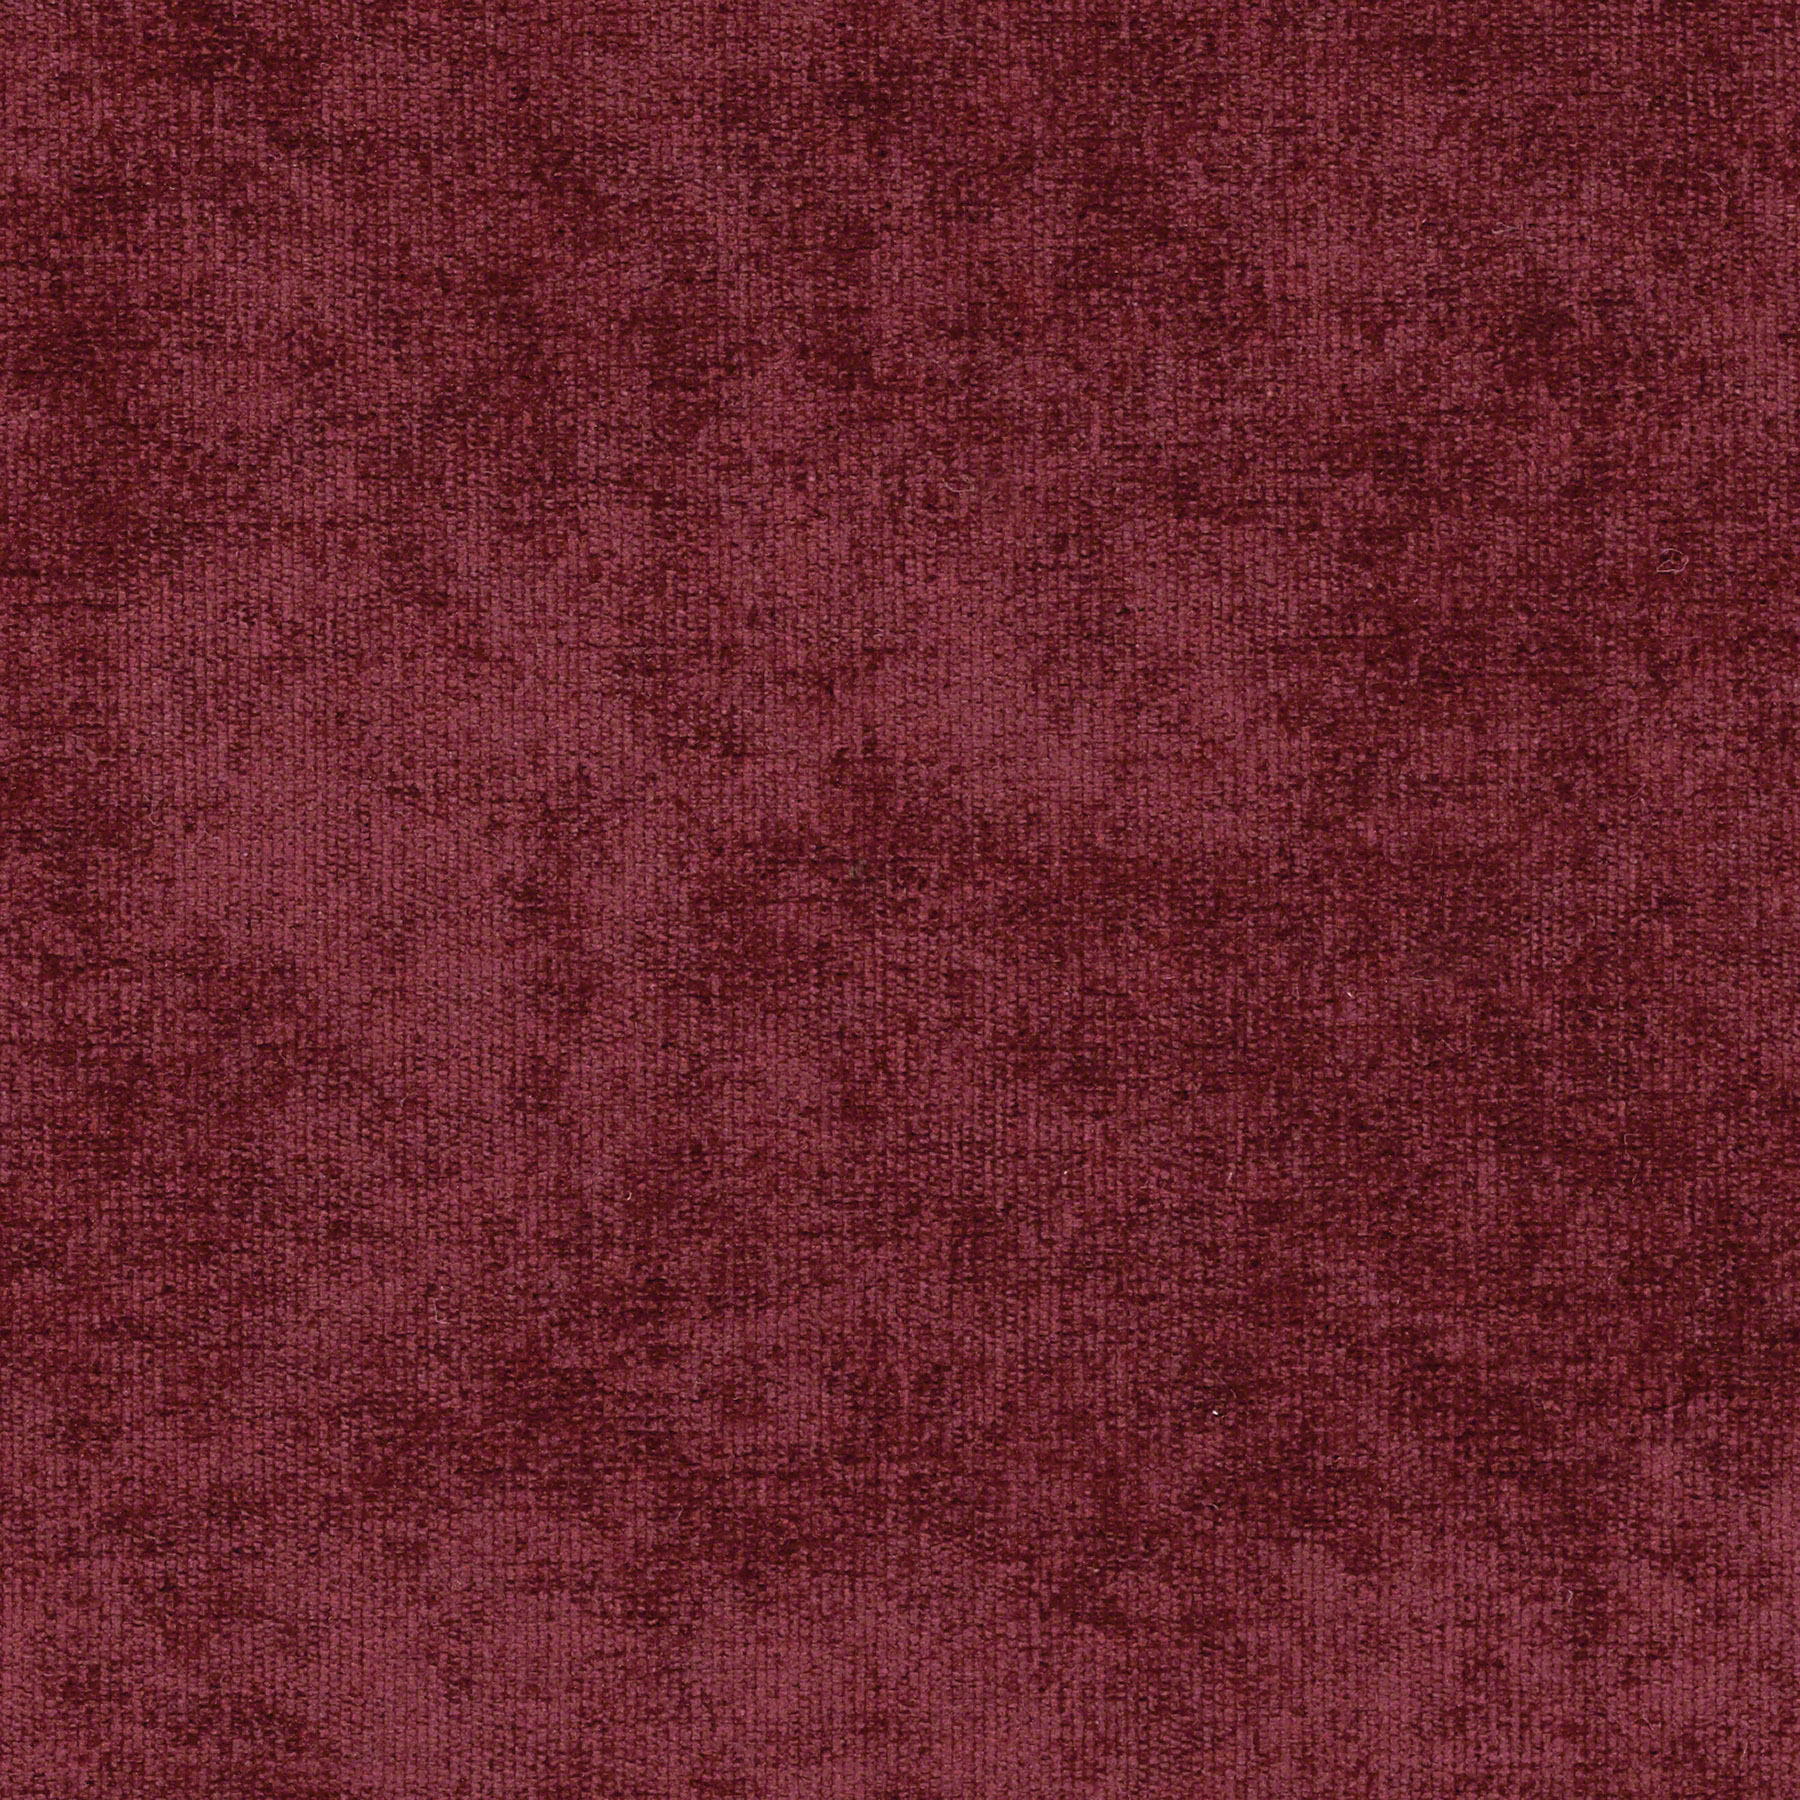 Madeira Red Plain Woven Upholstery Fabric